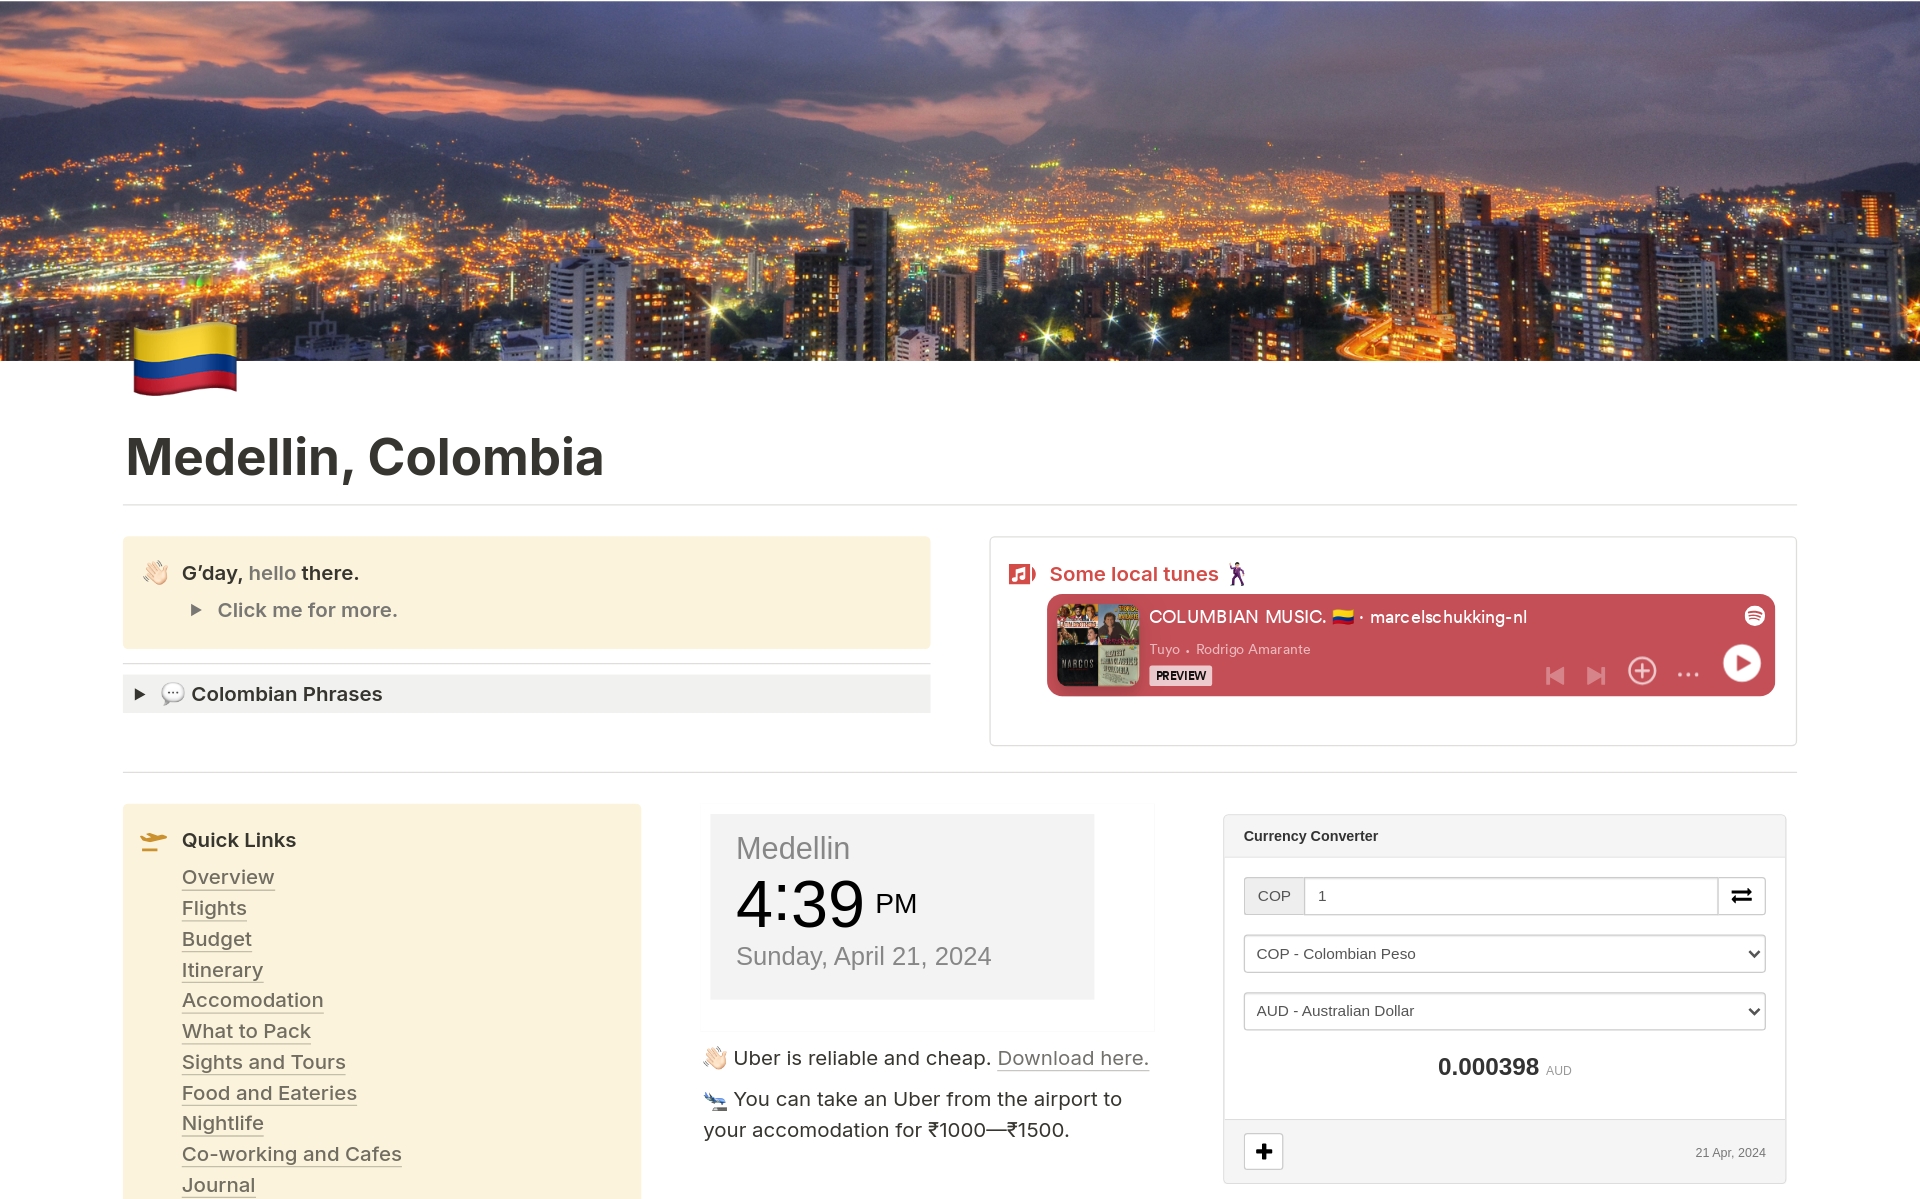 This is the ultimate travel planner and assistant.

Use this guide as a template to plan and manage your upcoming trip.

For anyone looking to travel to Medellin, Colombia, you WANT this guide.